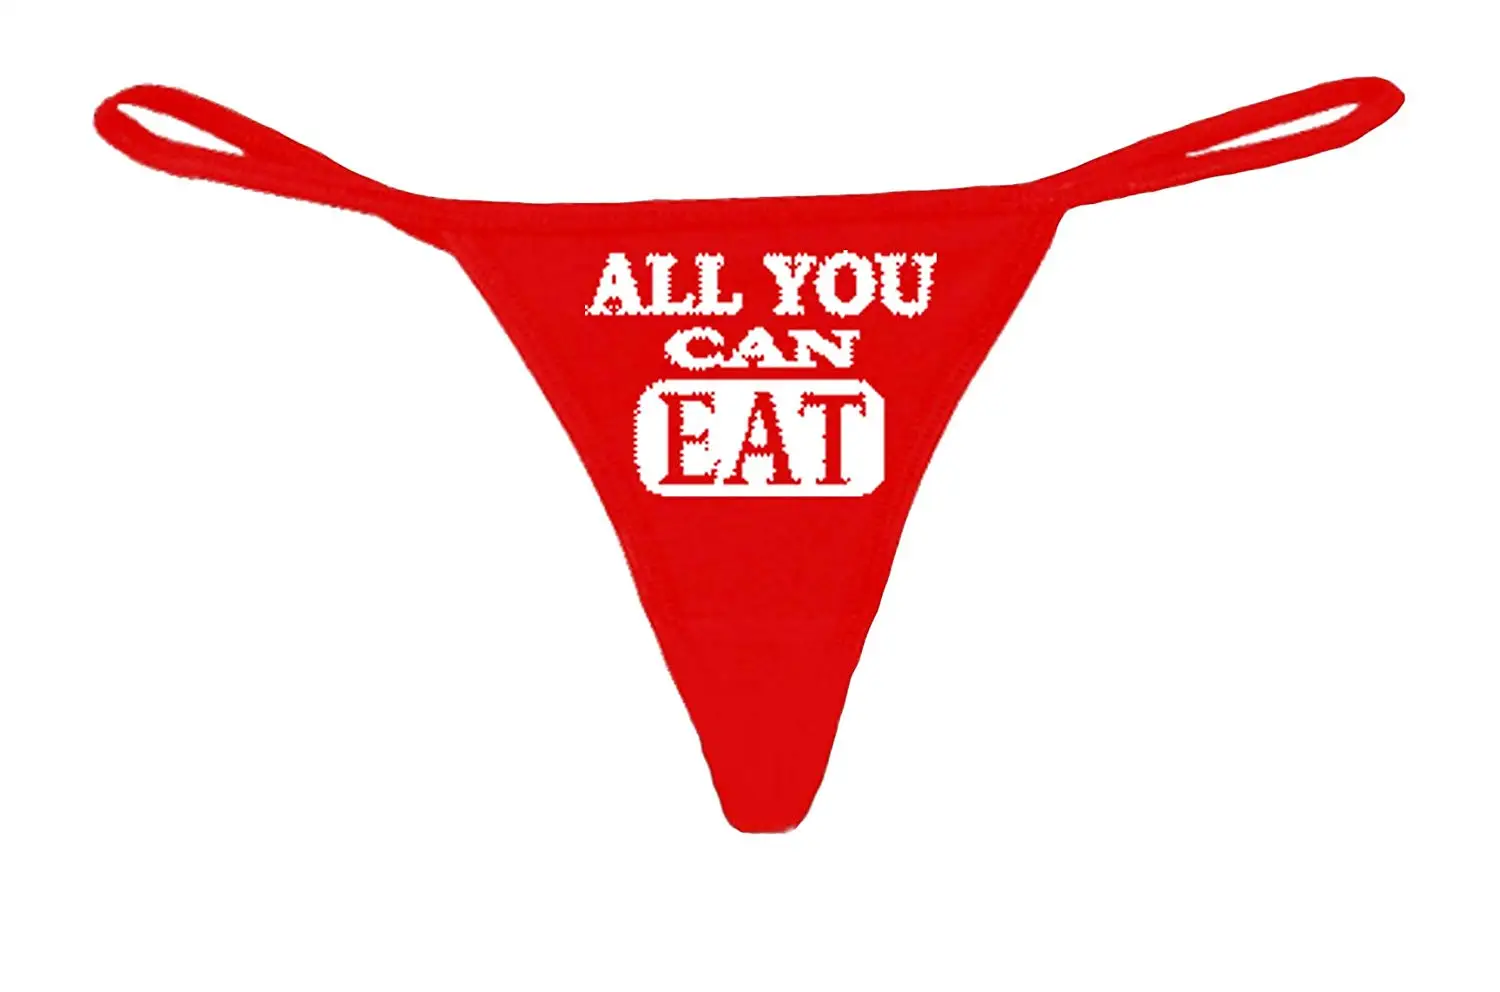 SHORE TRENDZ Women's Made in USA Funny Red Thong G-String All You Can Eat...